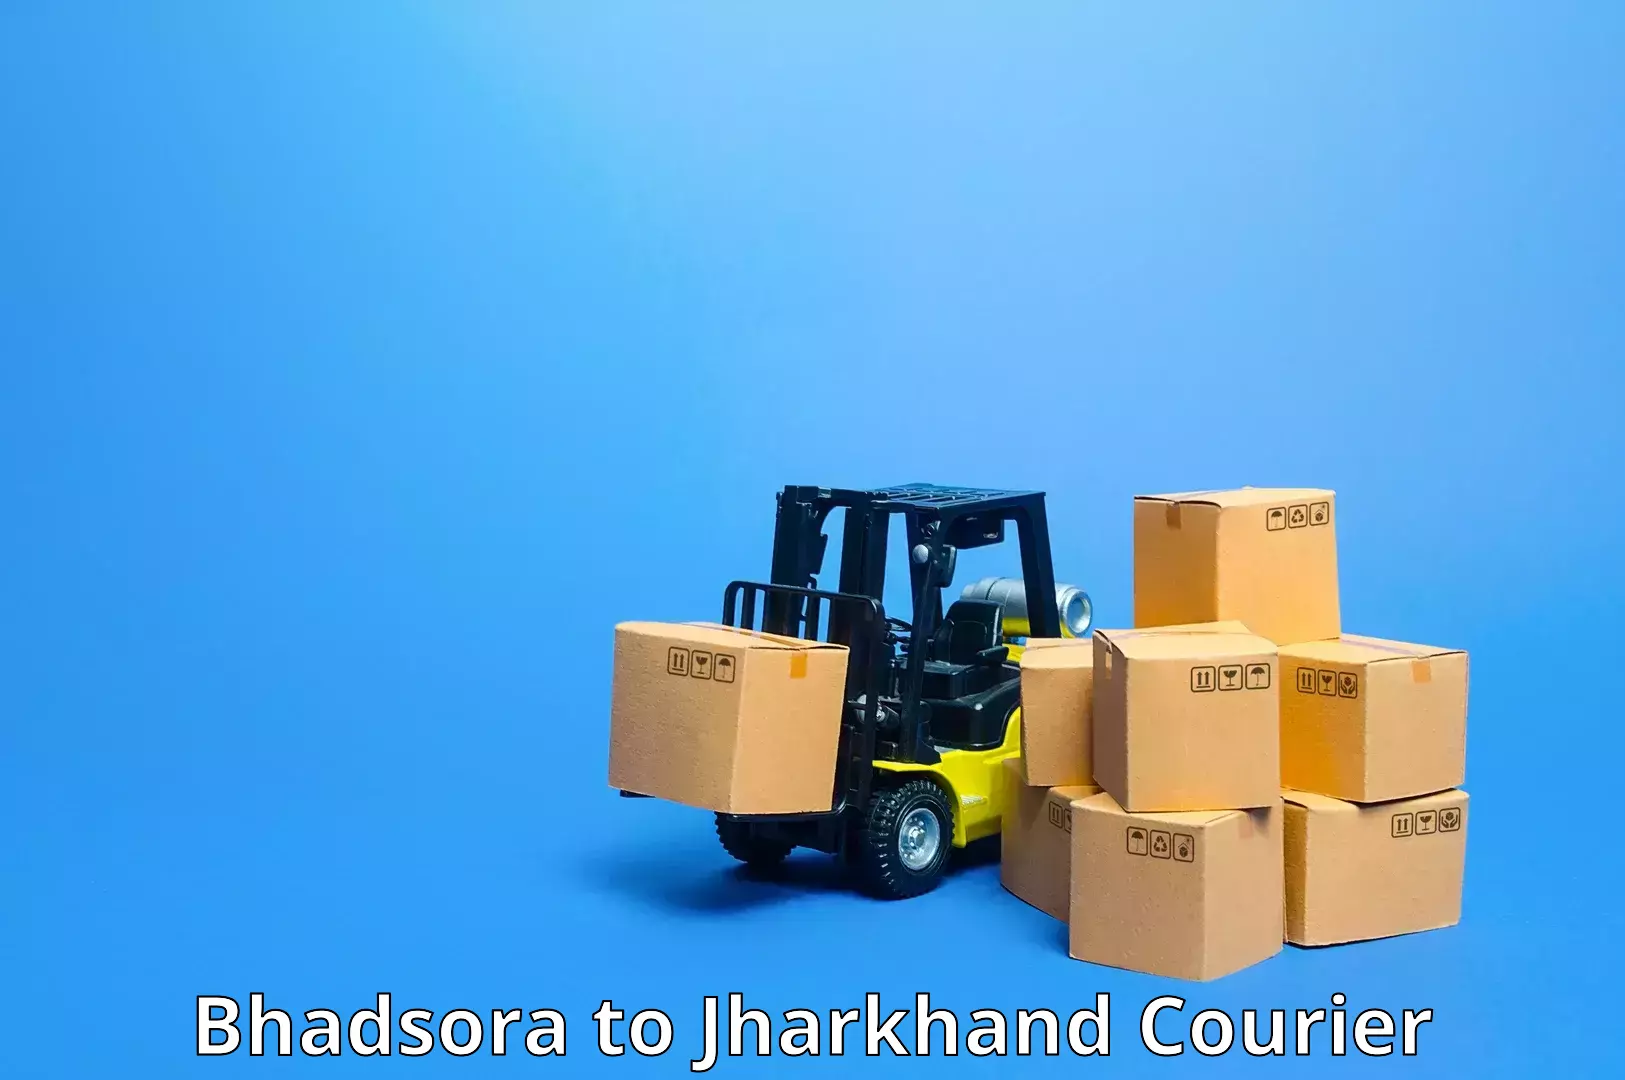 Affordable parcel rates Bhadsora to Itkhori